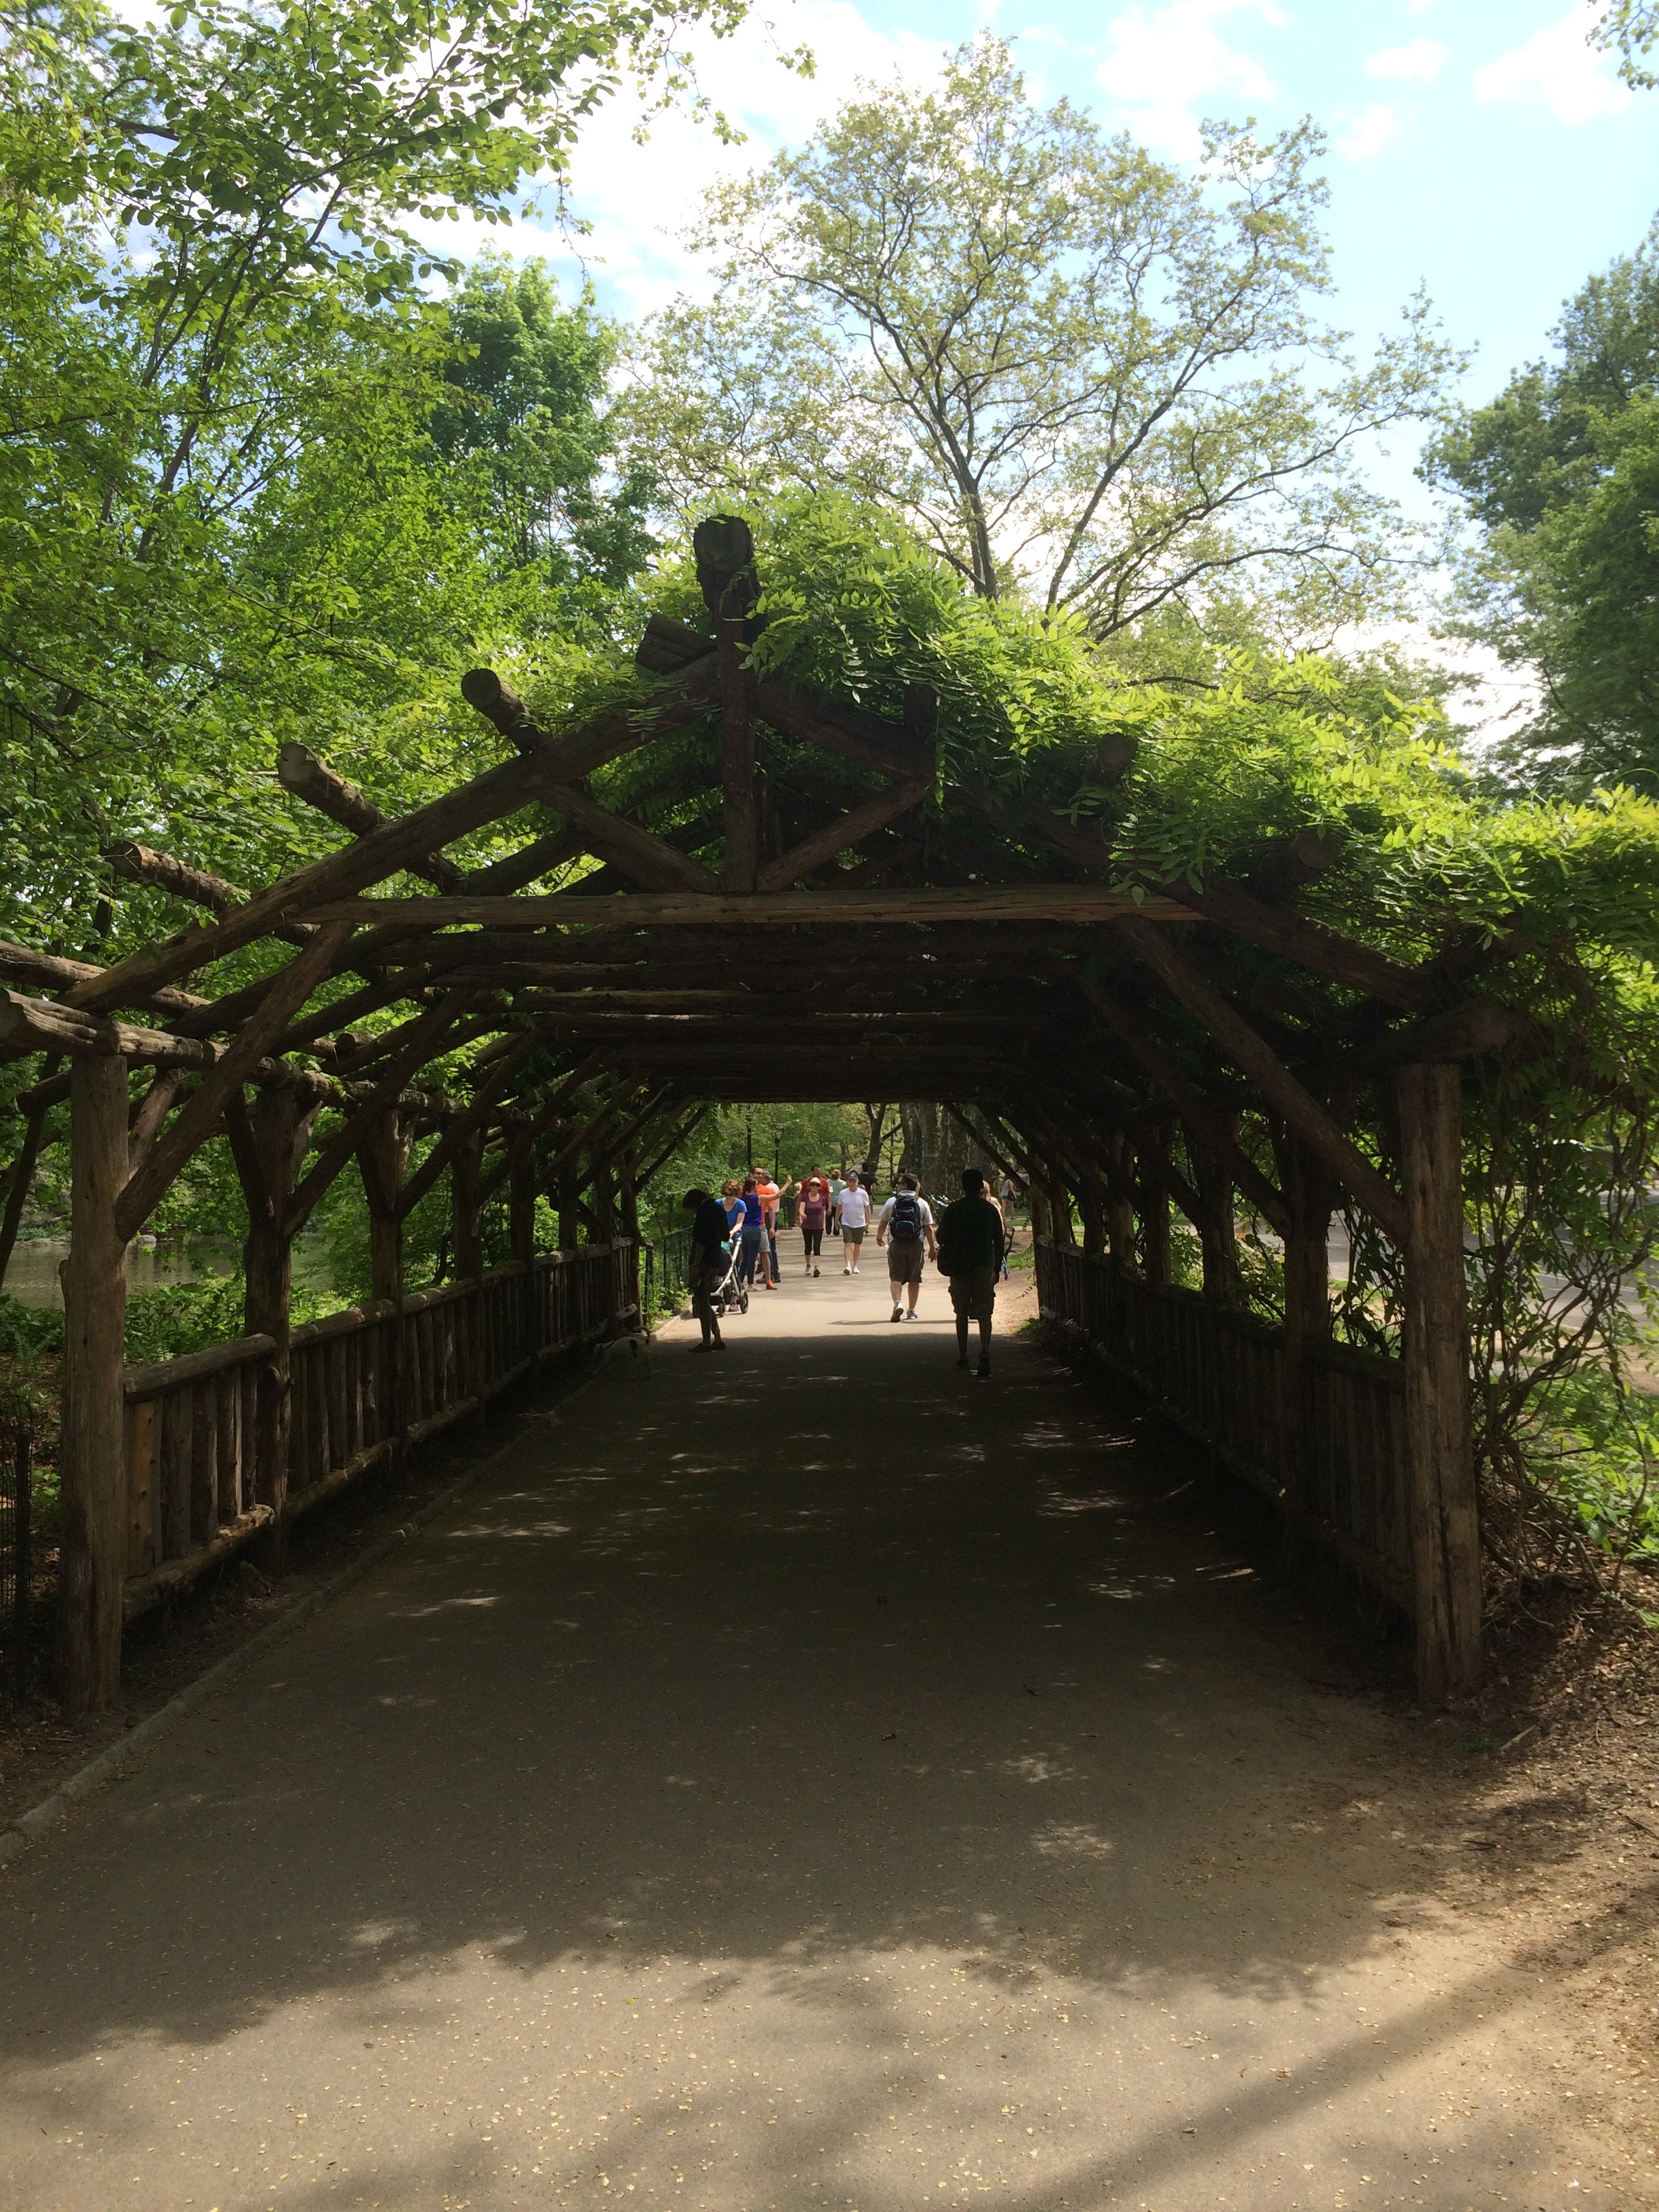 Covered Walkway In Central Park